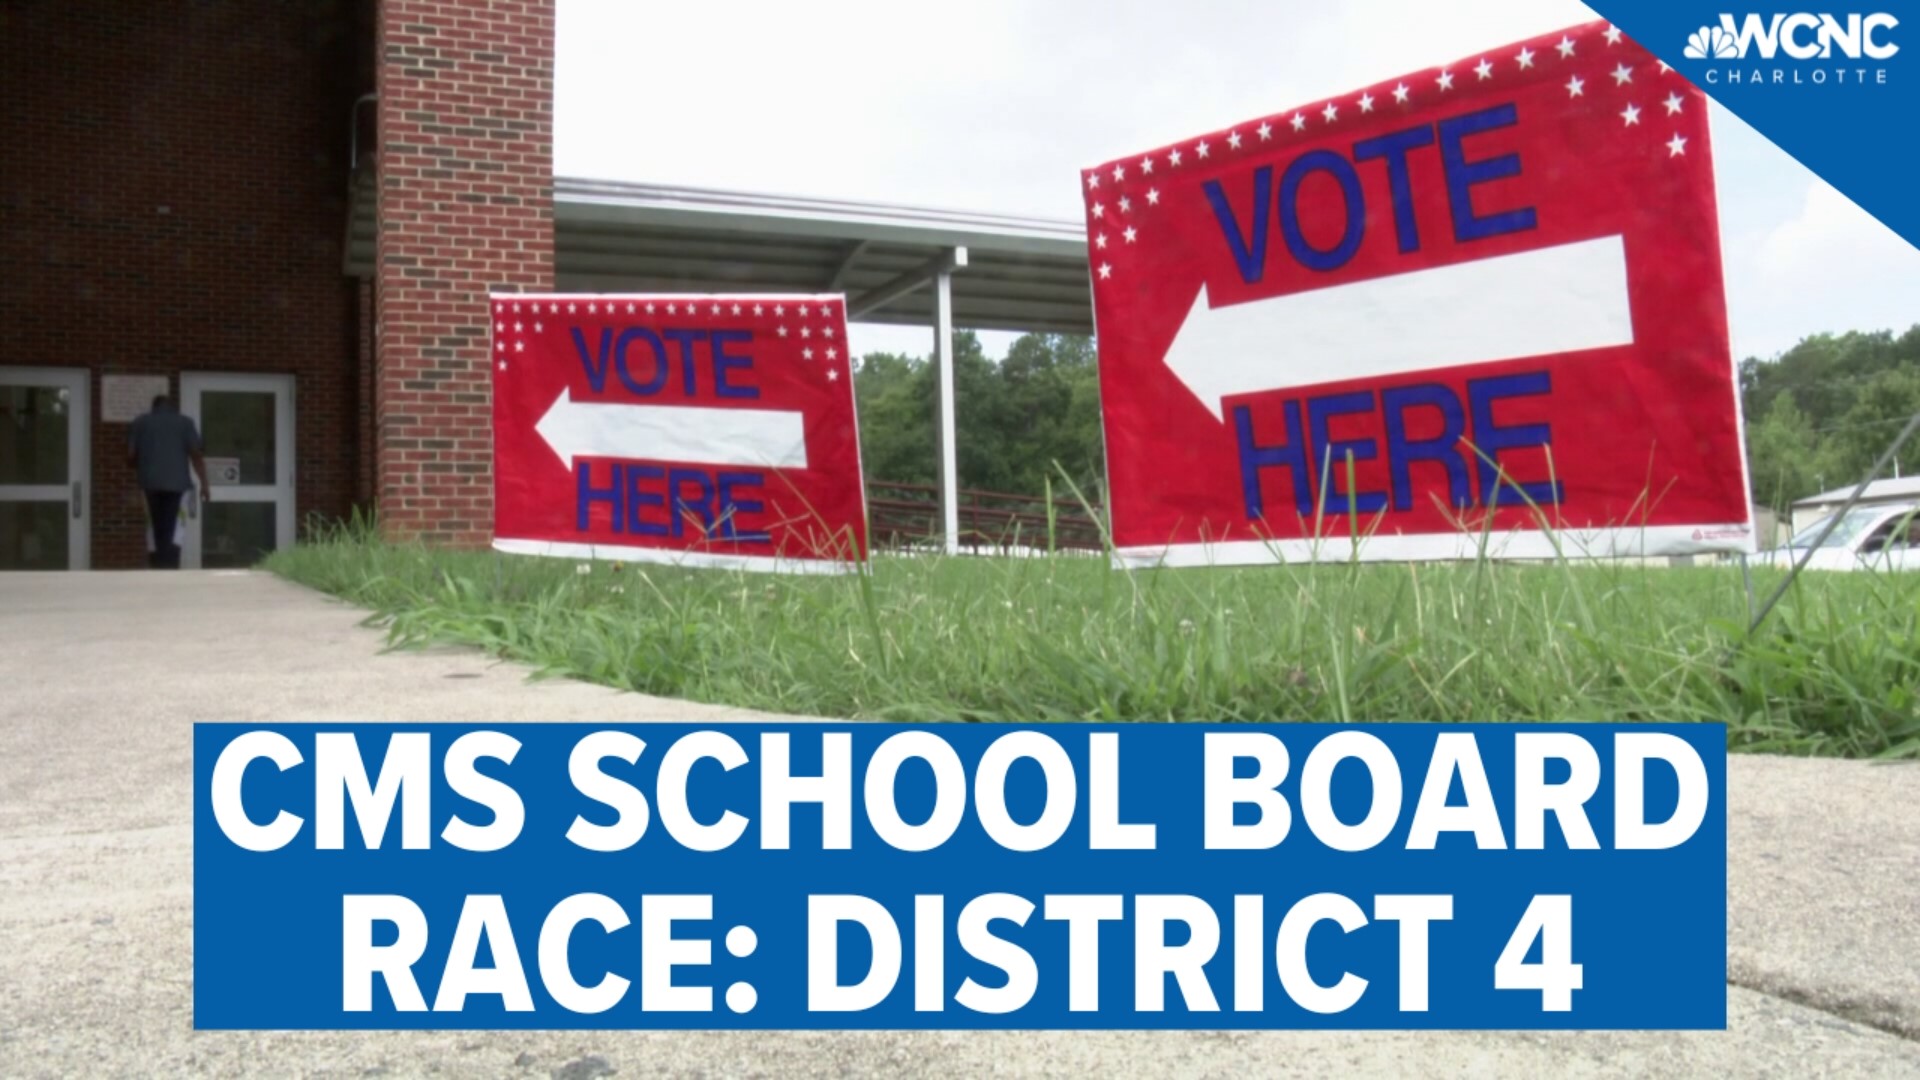 An old match-up is back in the District 4 seat for the CMS school board.